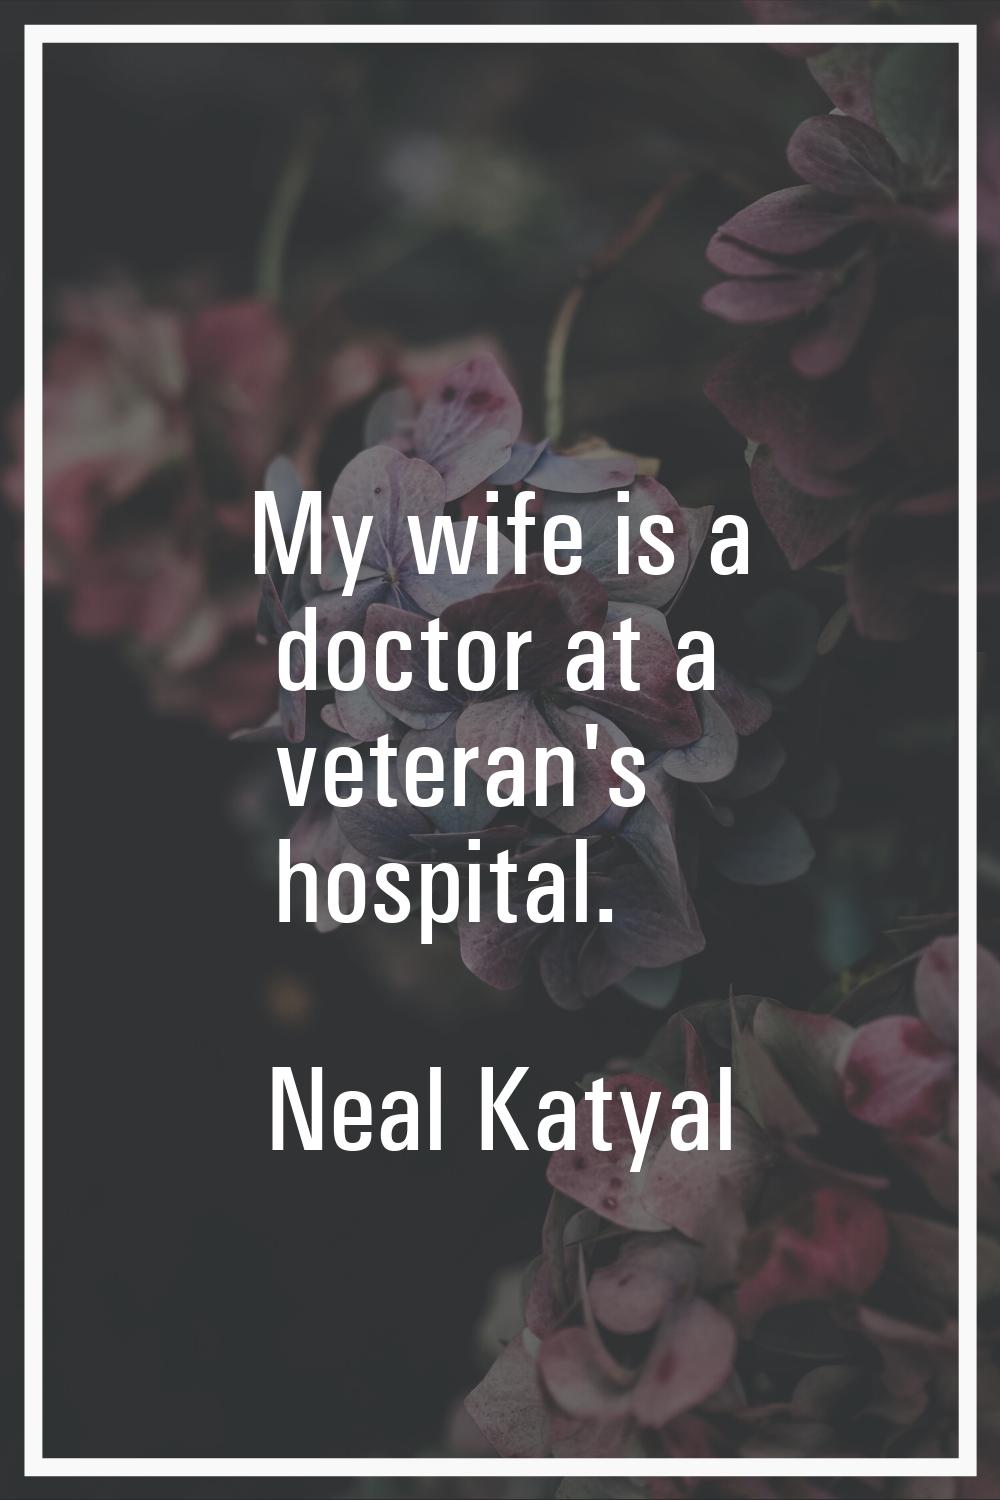 My wife is a doctor at a veteran's hospital.